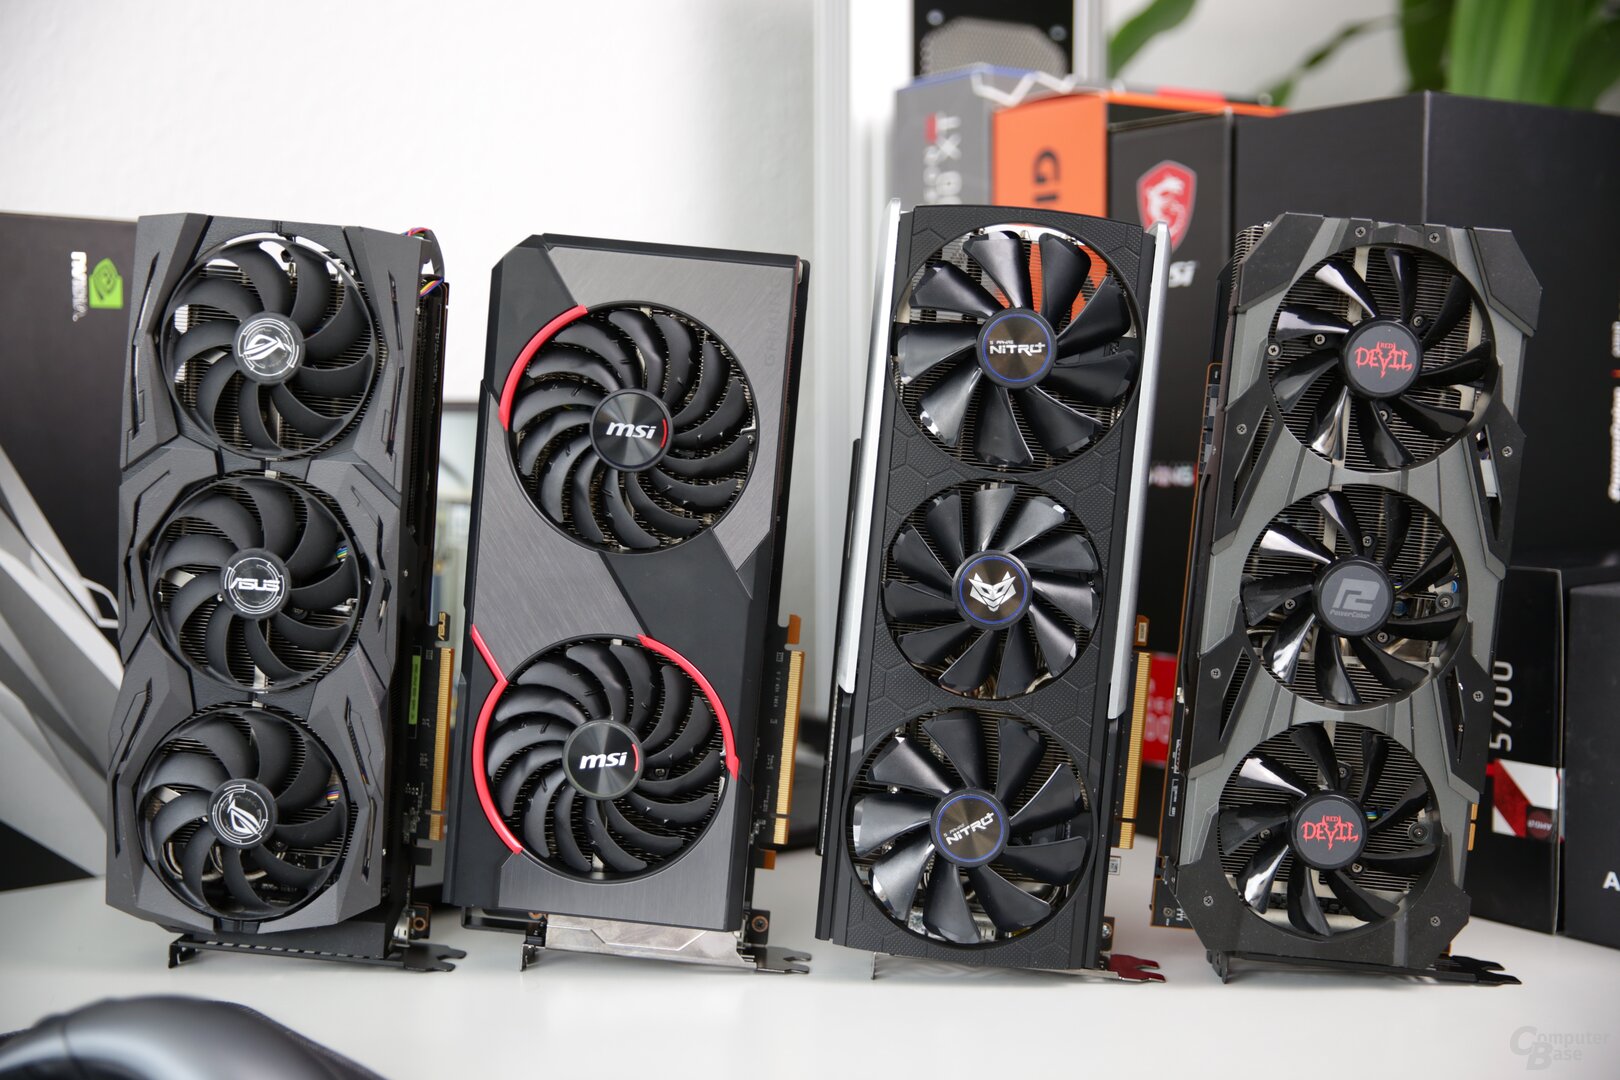 From left to right: Asus Strix OC, MSI Gaming X, Sapphire Nitro + and PowerColor Red Devil